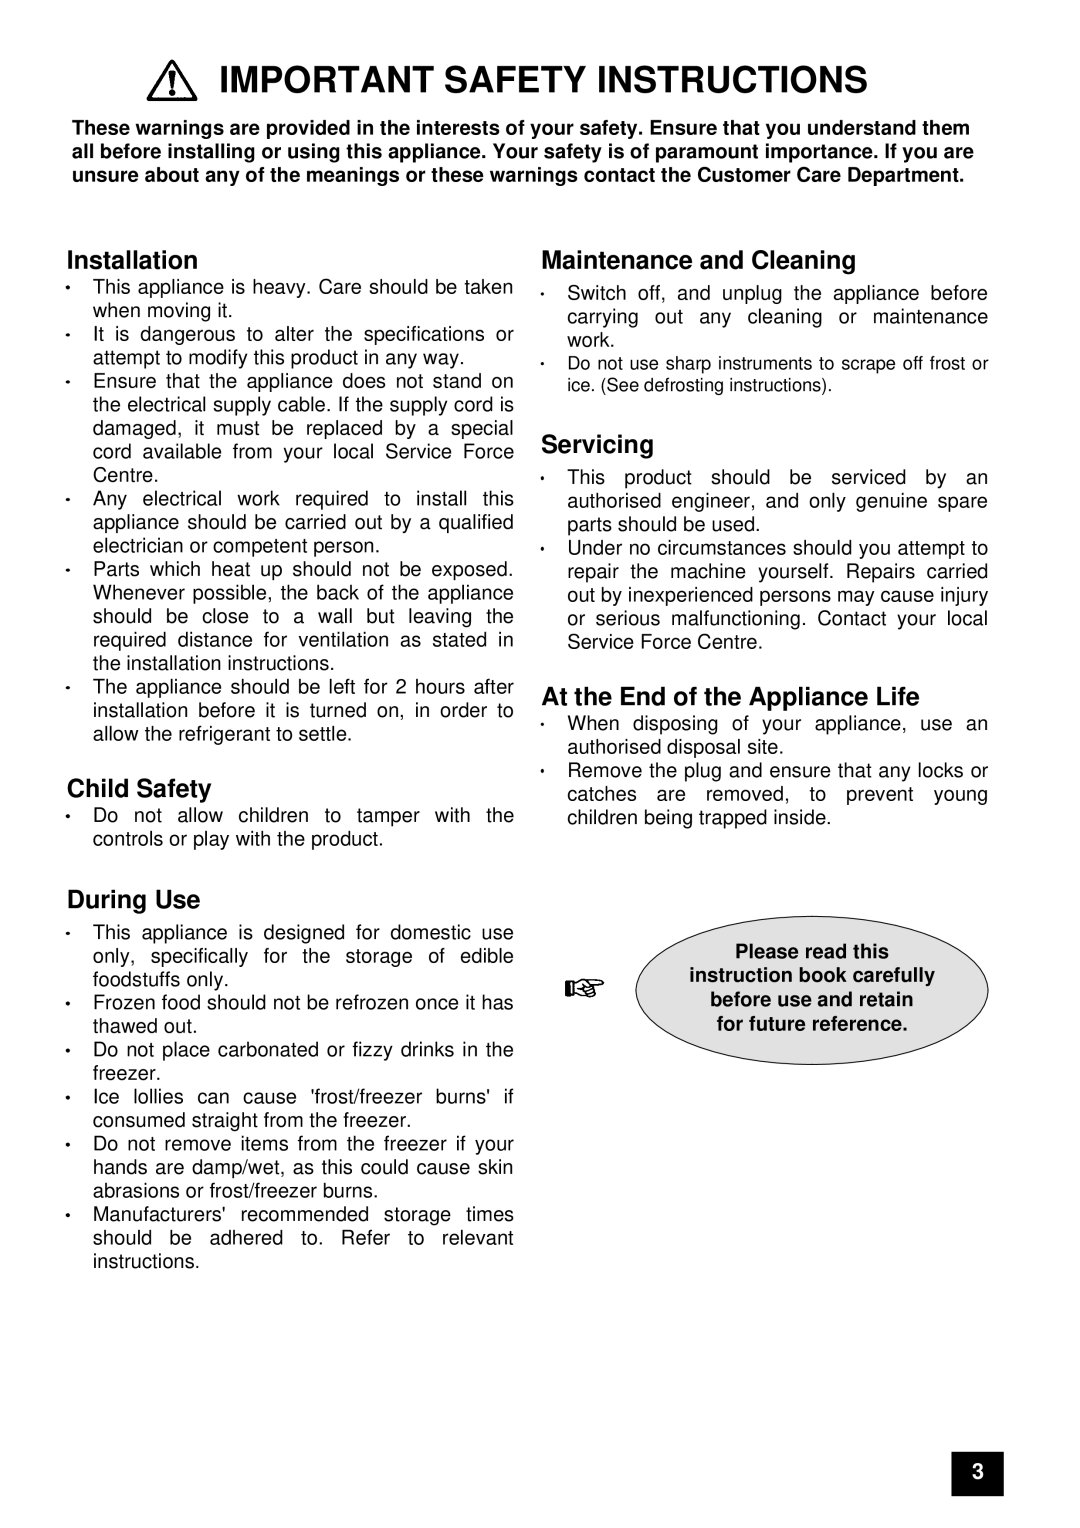 Electrolux EU 6047T Important Safety Instructions, Installation, Child Safety, Maintenance and Cleaning, Servicing 